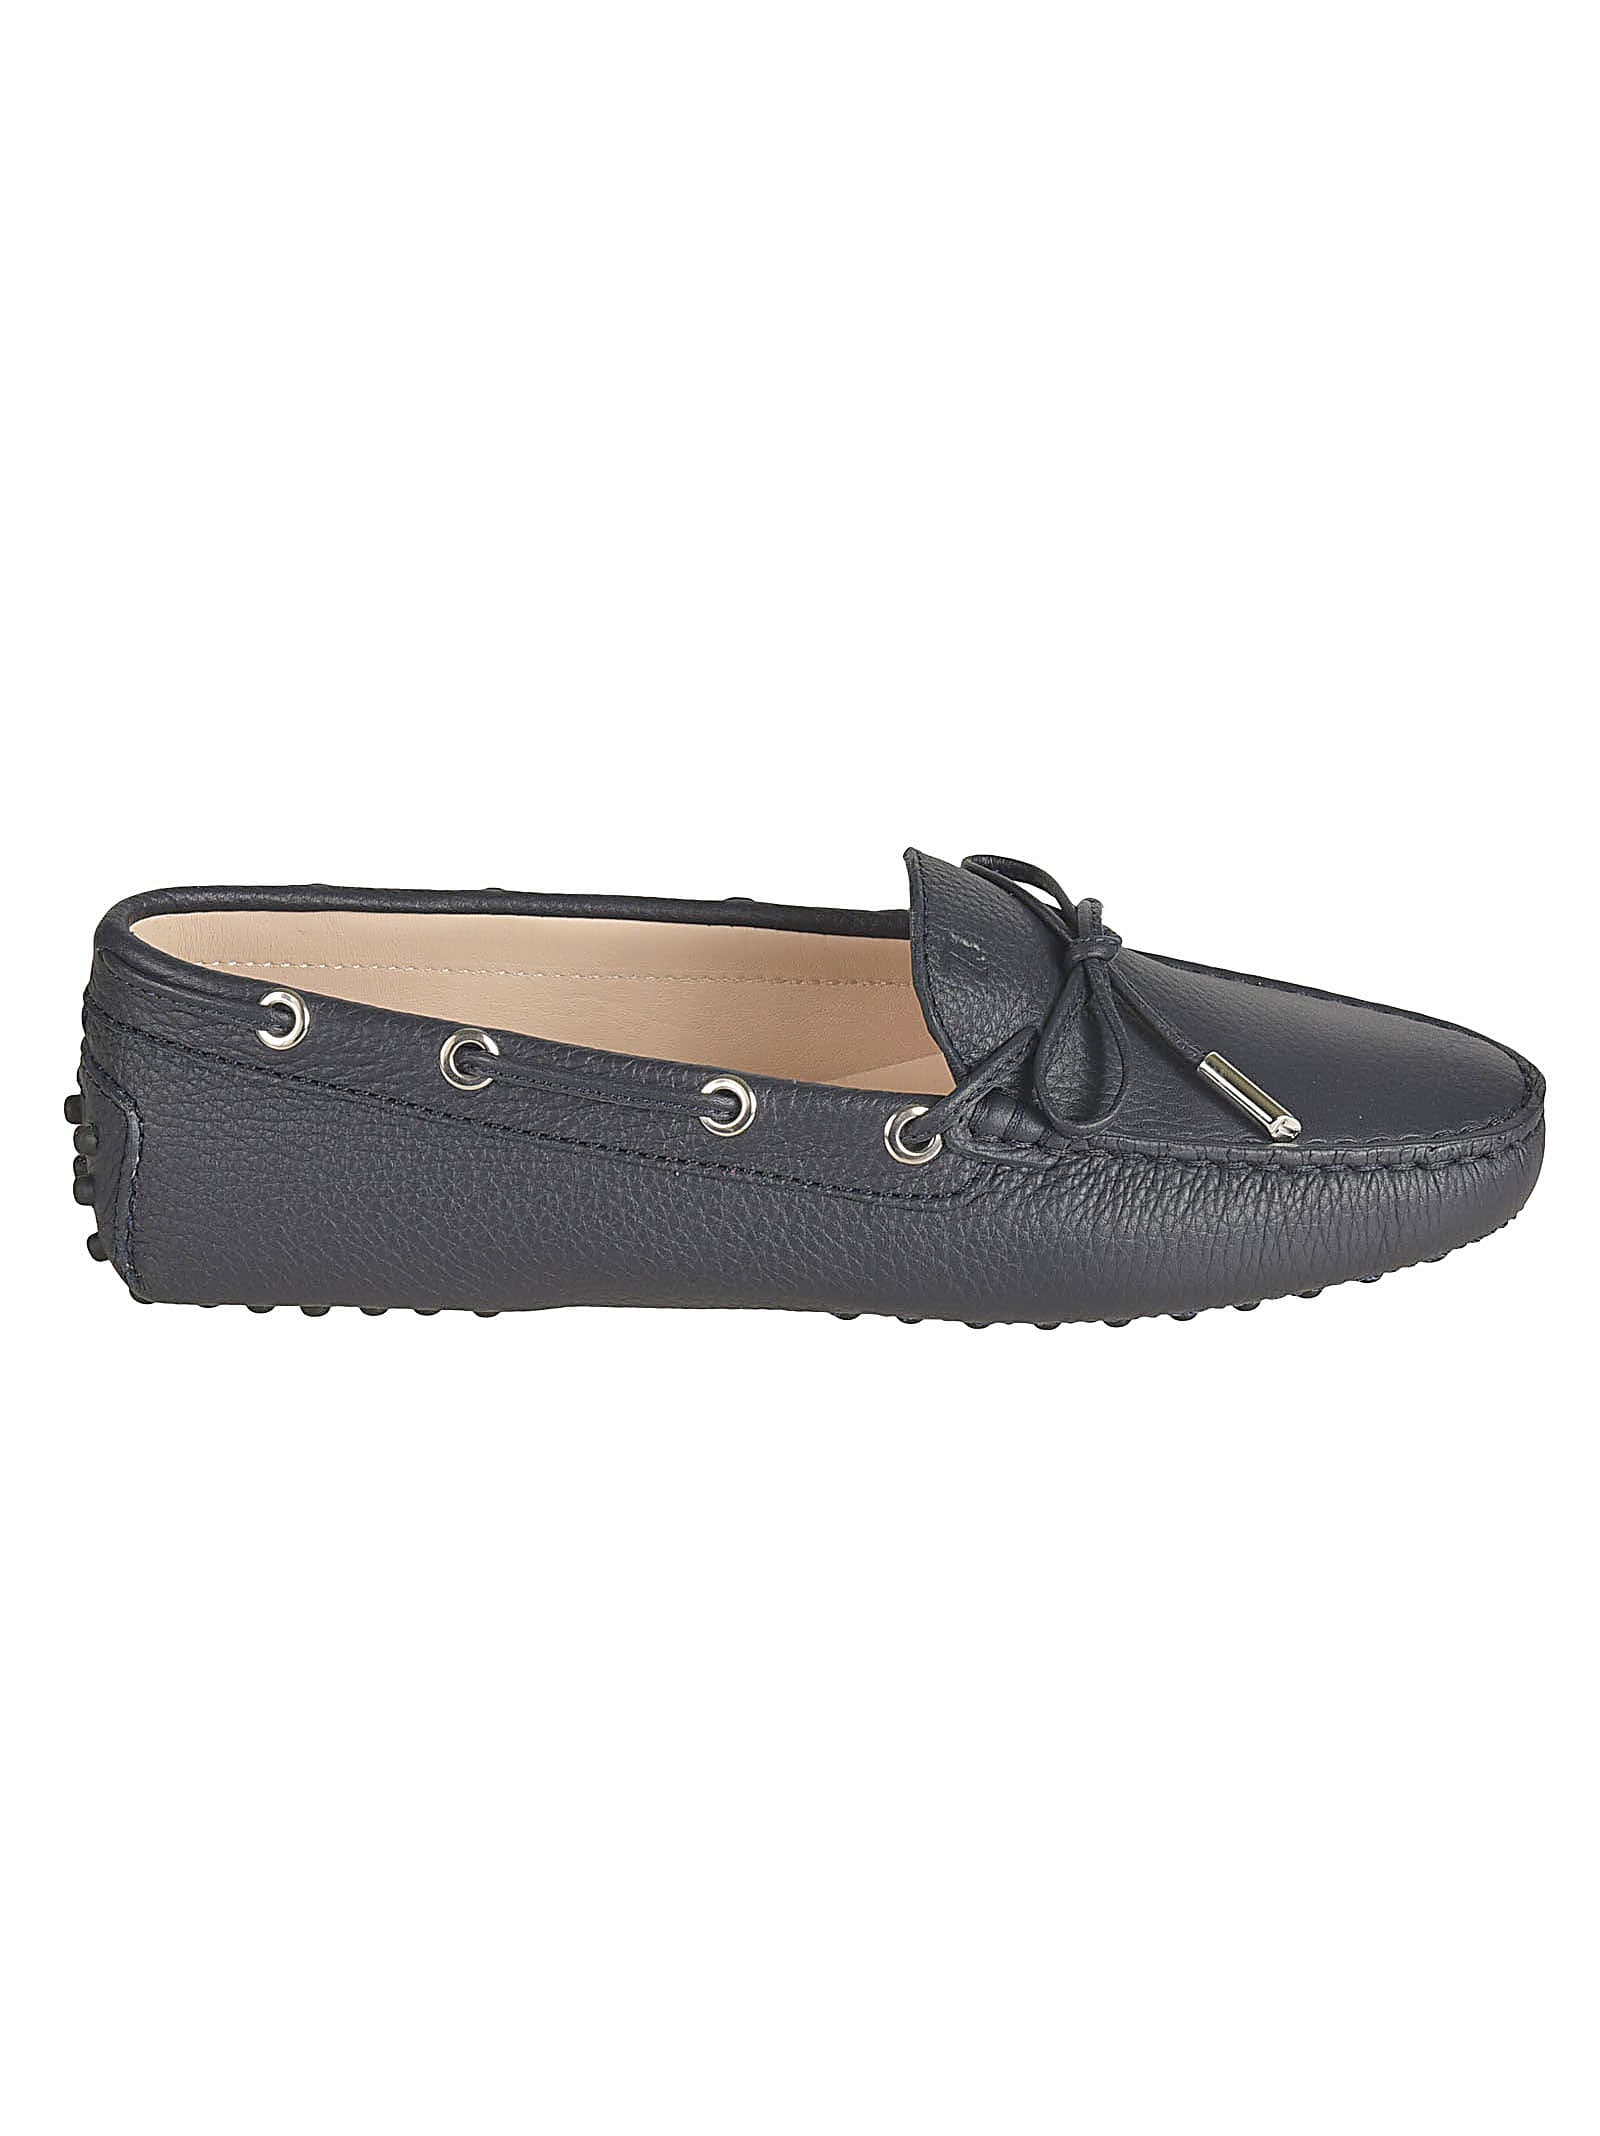 Buy Tods Classic Laced Loafers online, shop Tods shoes with free shipping